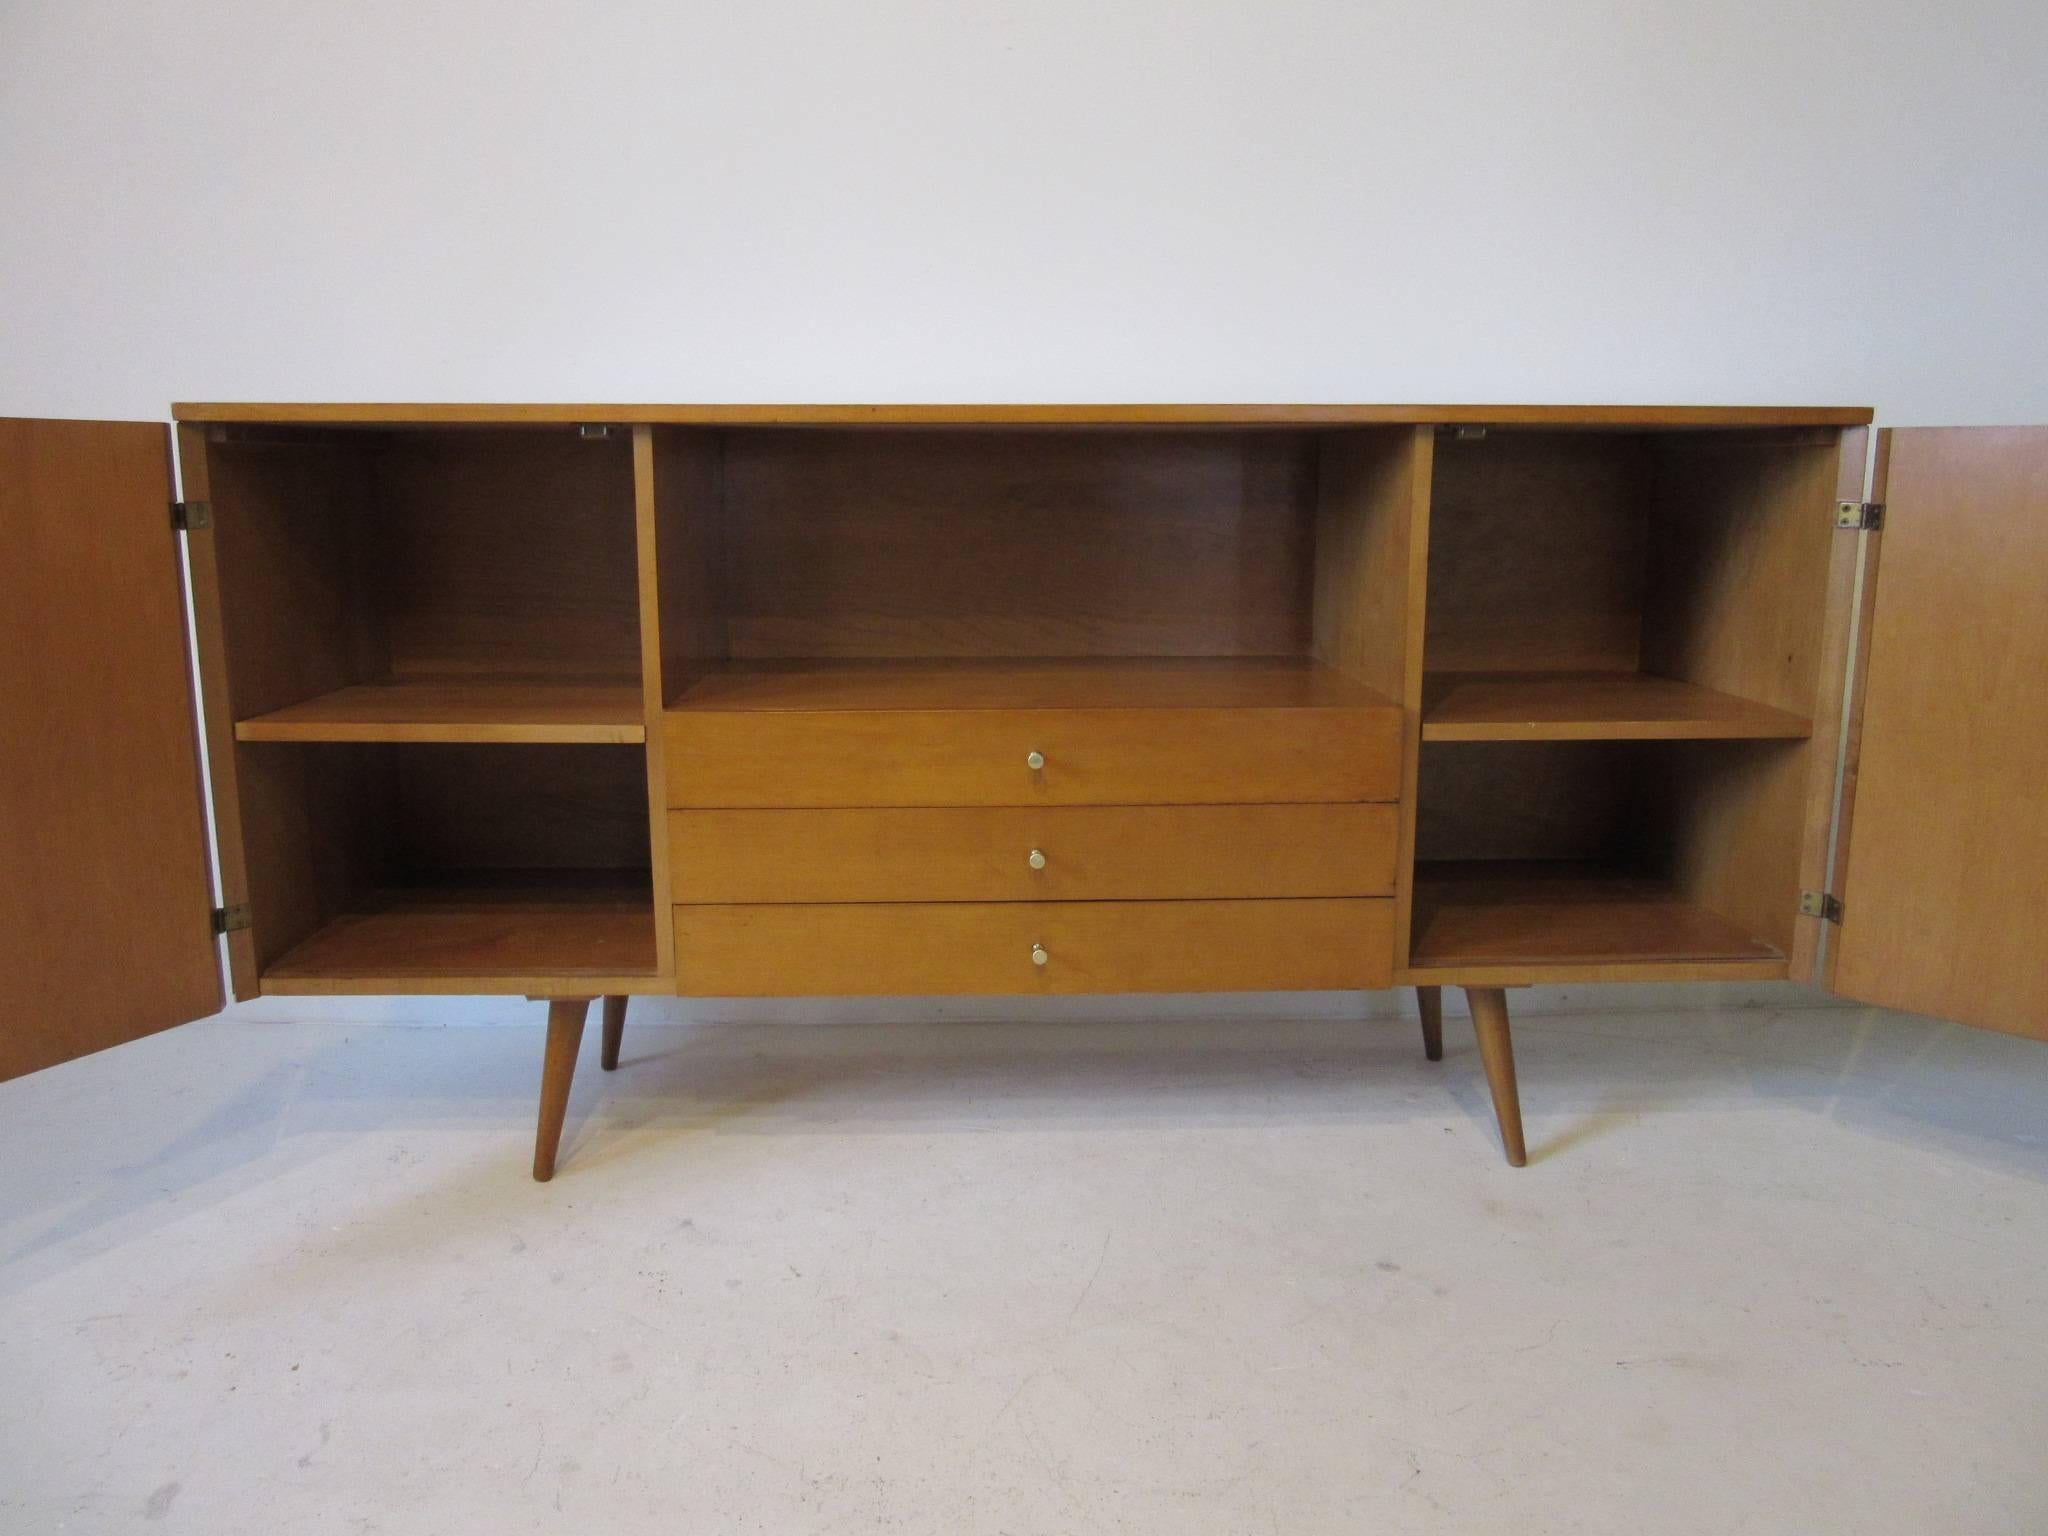 A McCobb credenza or server in a solid maple wood with two doors, adjustable shelves, three middle drawers , brass pulls and an open storage area all sitting on conical legs. A hard form to find which could be used as a entertainment unit, server or